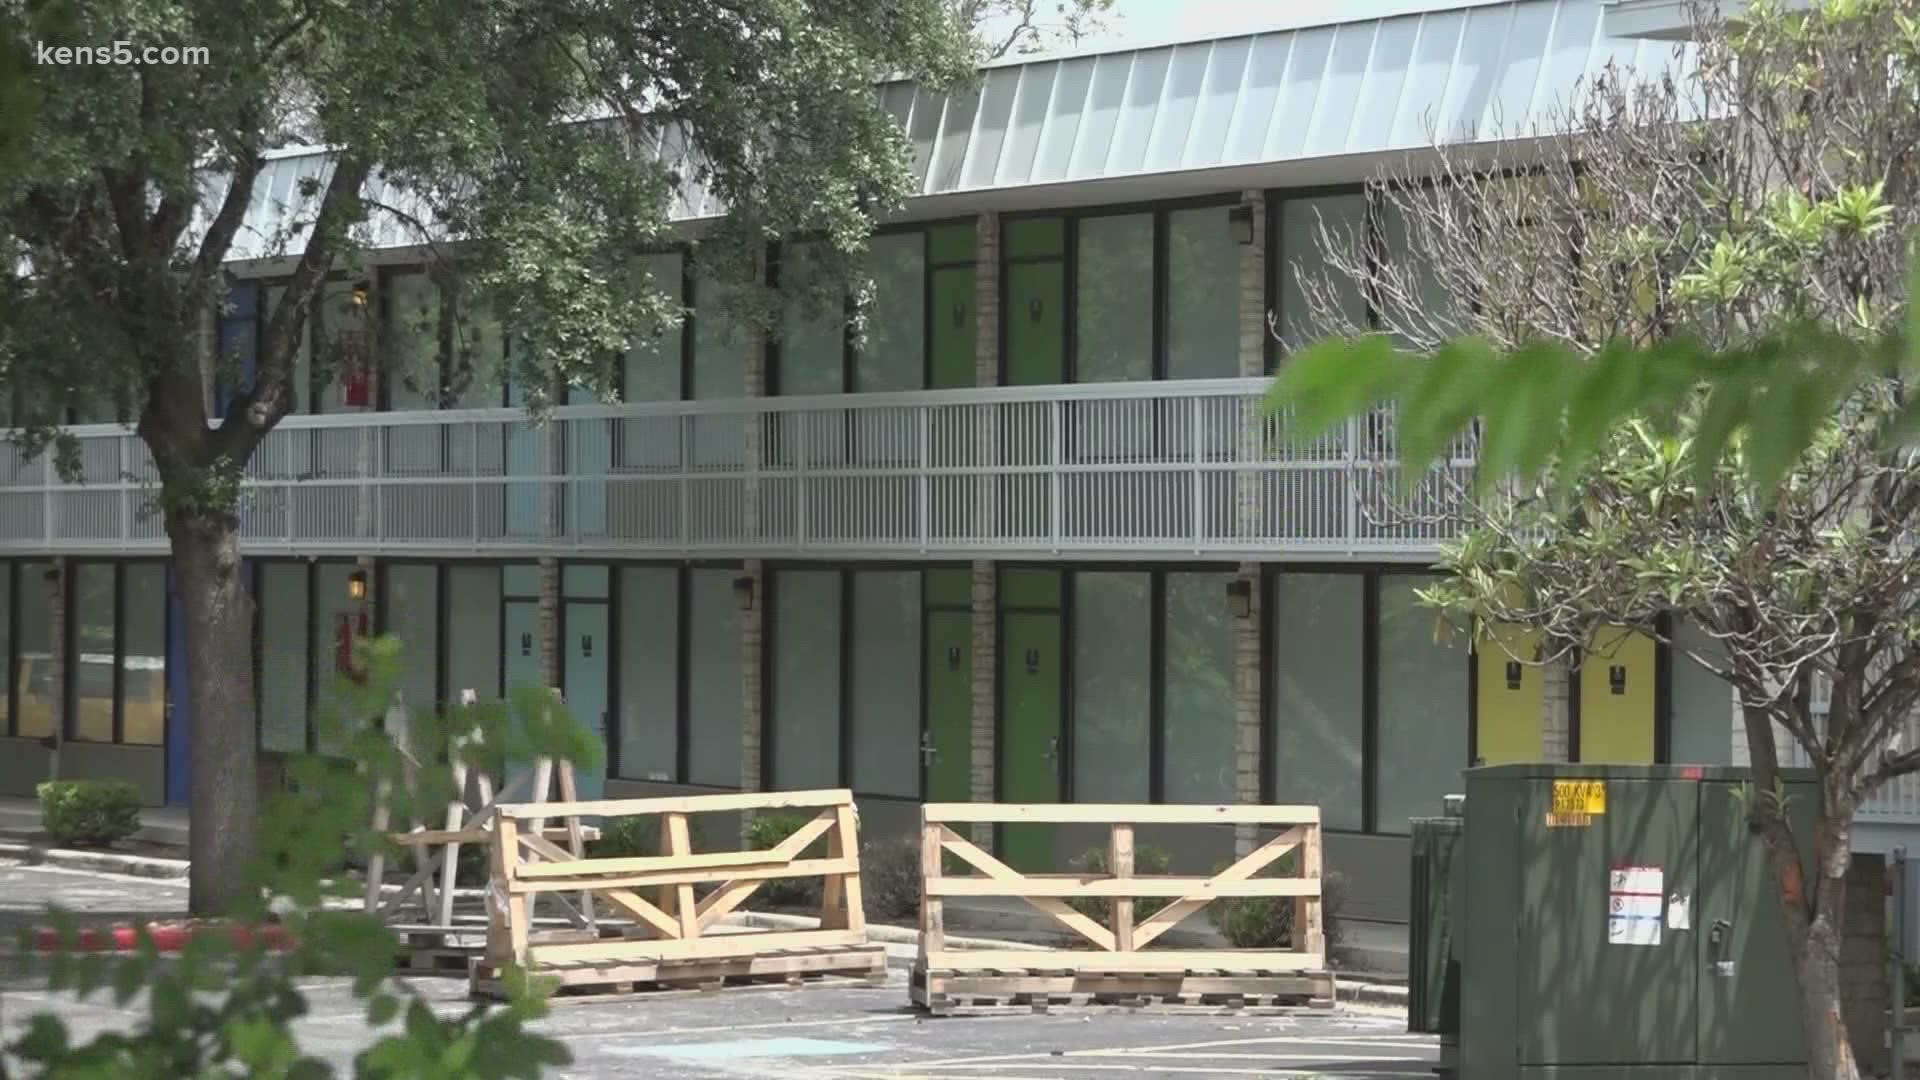 The city of New Braunfels received a special use permit request to convert rooms at the former Quality Inn off of I-35 into studio apartments.